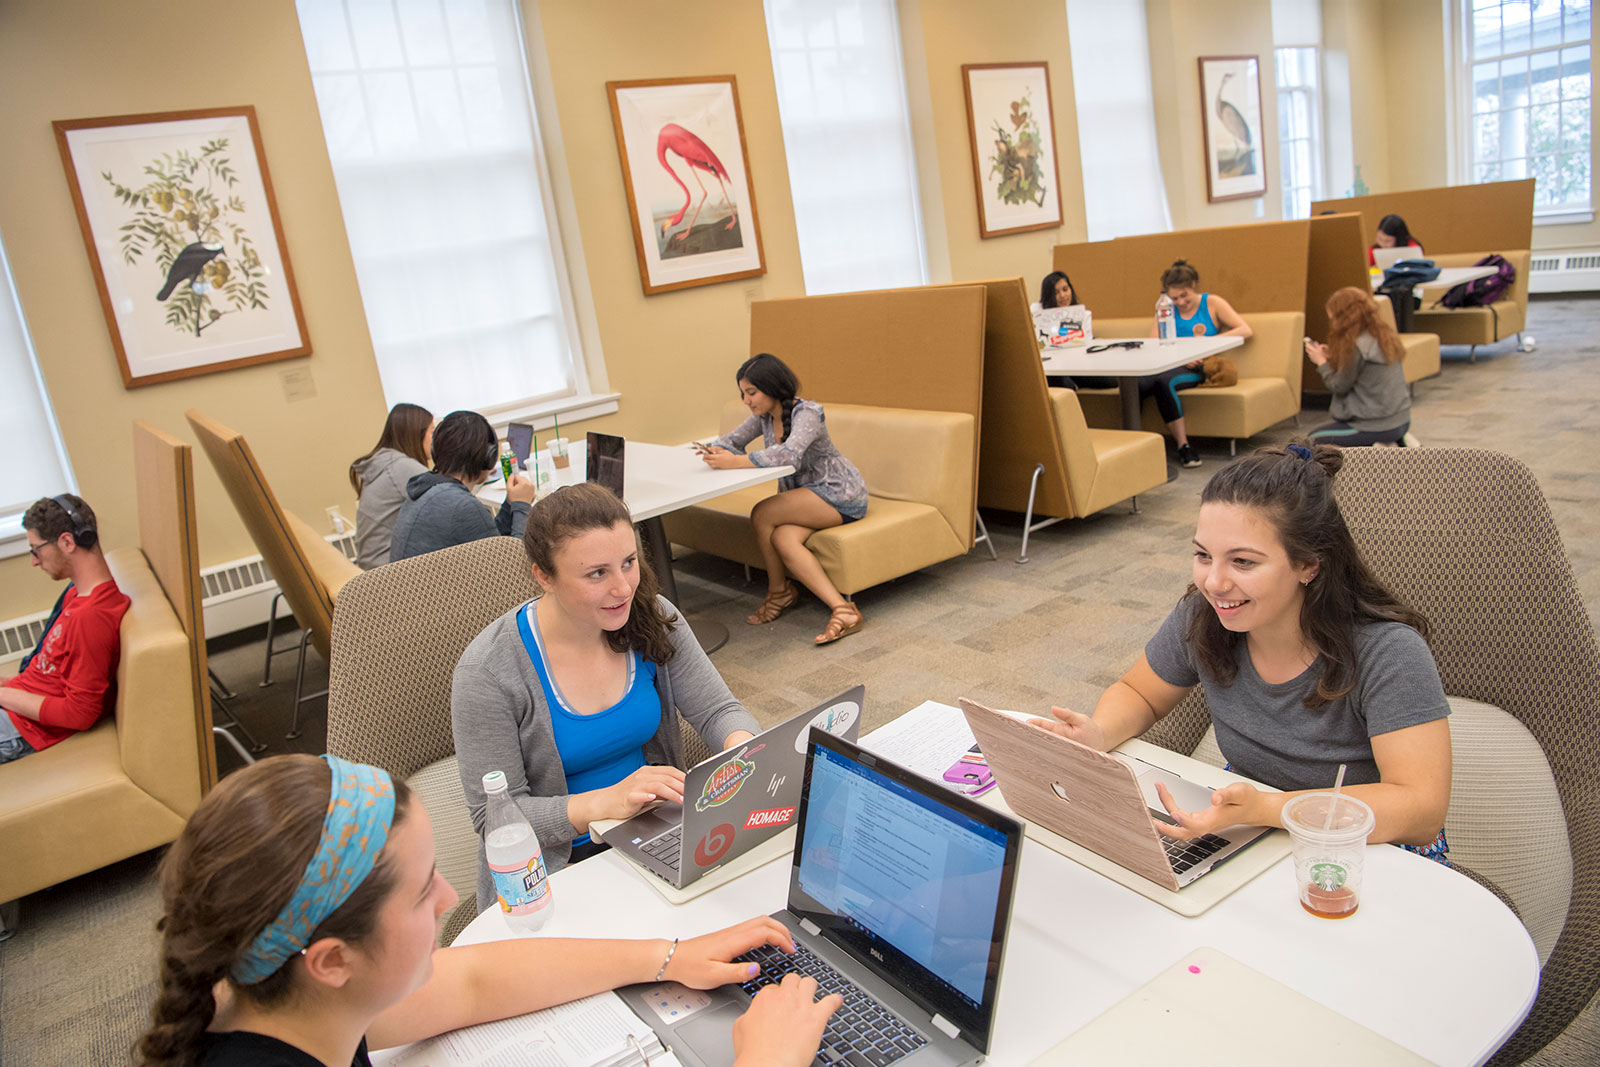 Student group study session in the library common area.